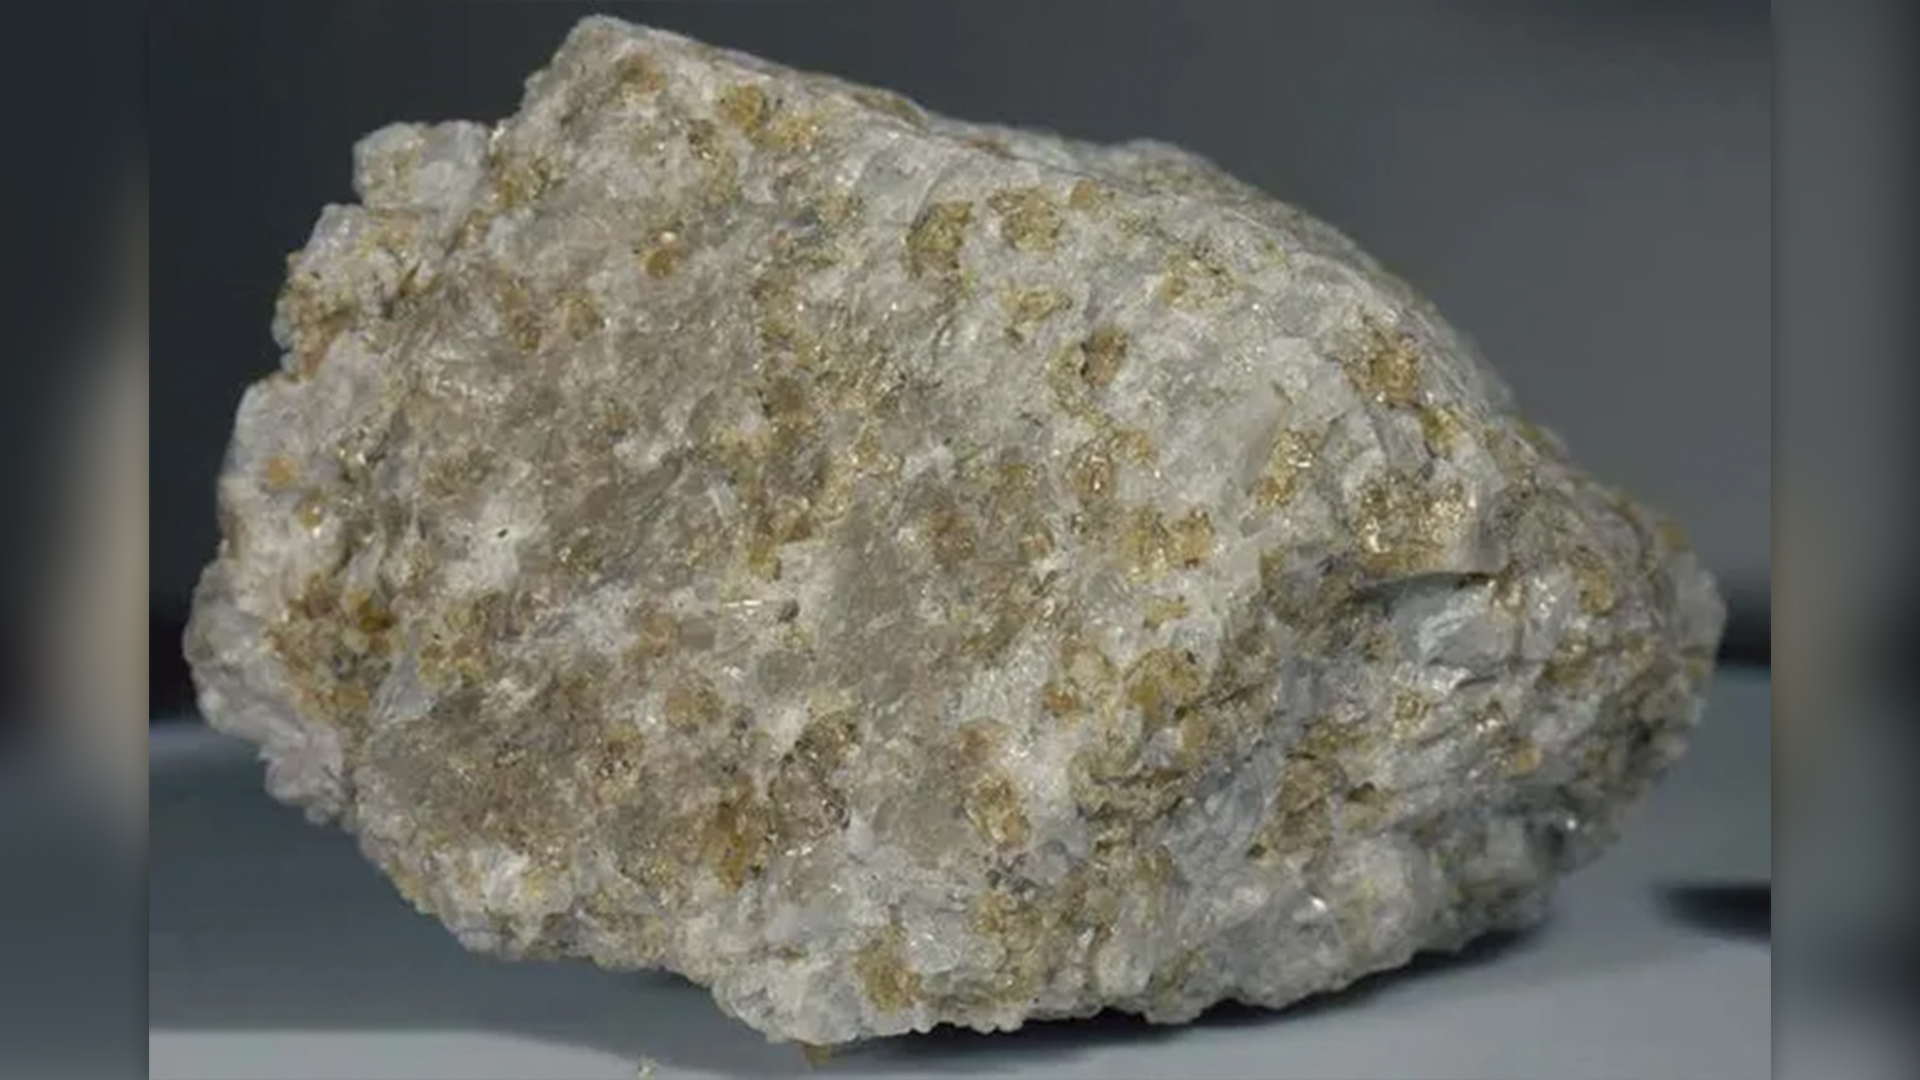 An image of the Apollo 17 moon rock troctolite 76535. This study was focused on sample 79221.